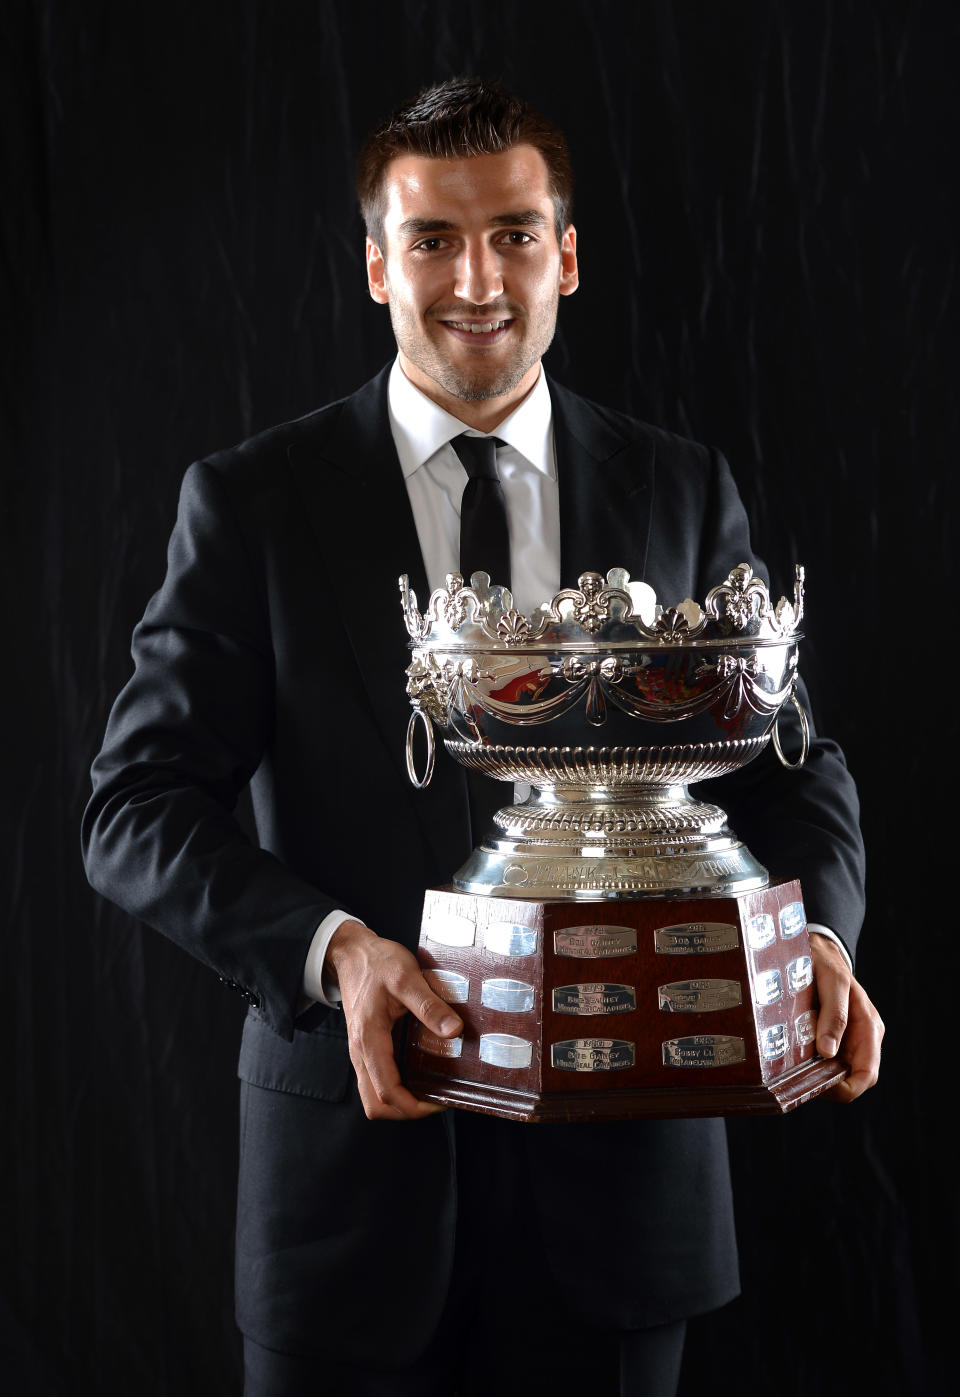 LAS VEGAS, NV - JUNE 20: Patrice Bergeron of the Boston Bruins poses after winning the Frank Selke Trophy during the 2012 NHL Awards at the Encore Theater at the Wynn Las Vegas on June 20, 2012 in Las Vegas, Nevada. (Photo by Harry How/Getty Images)